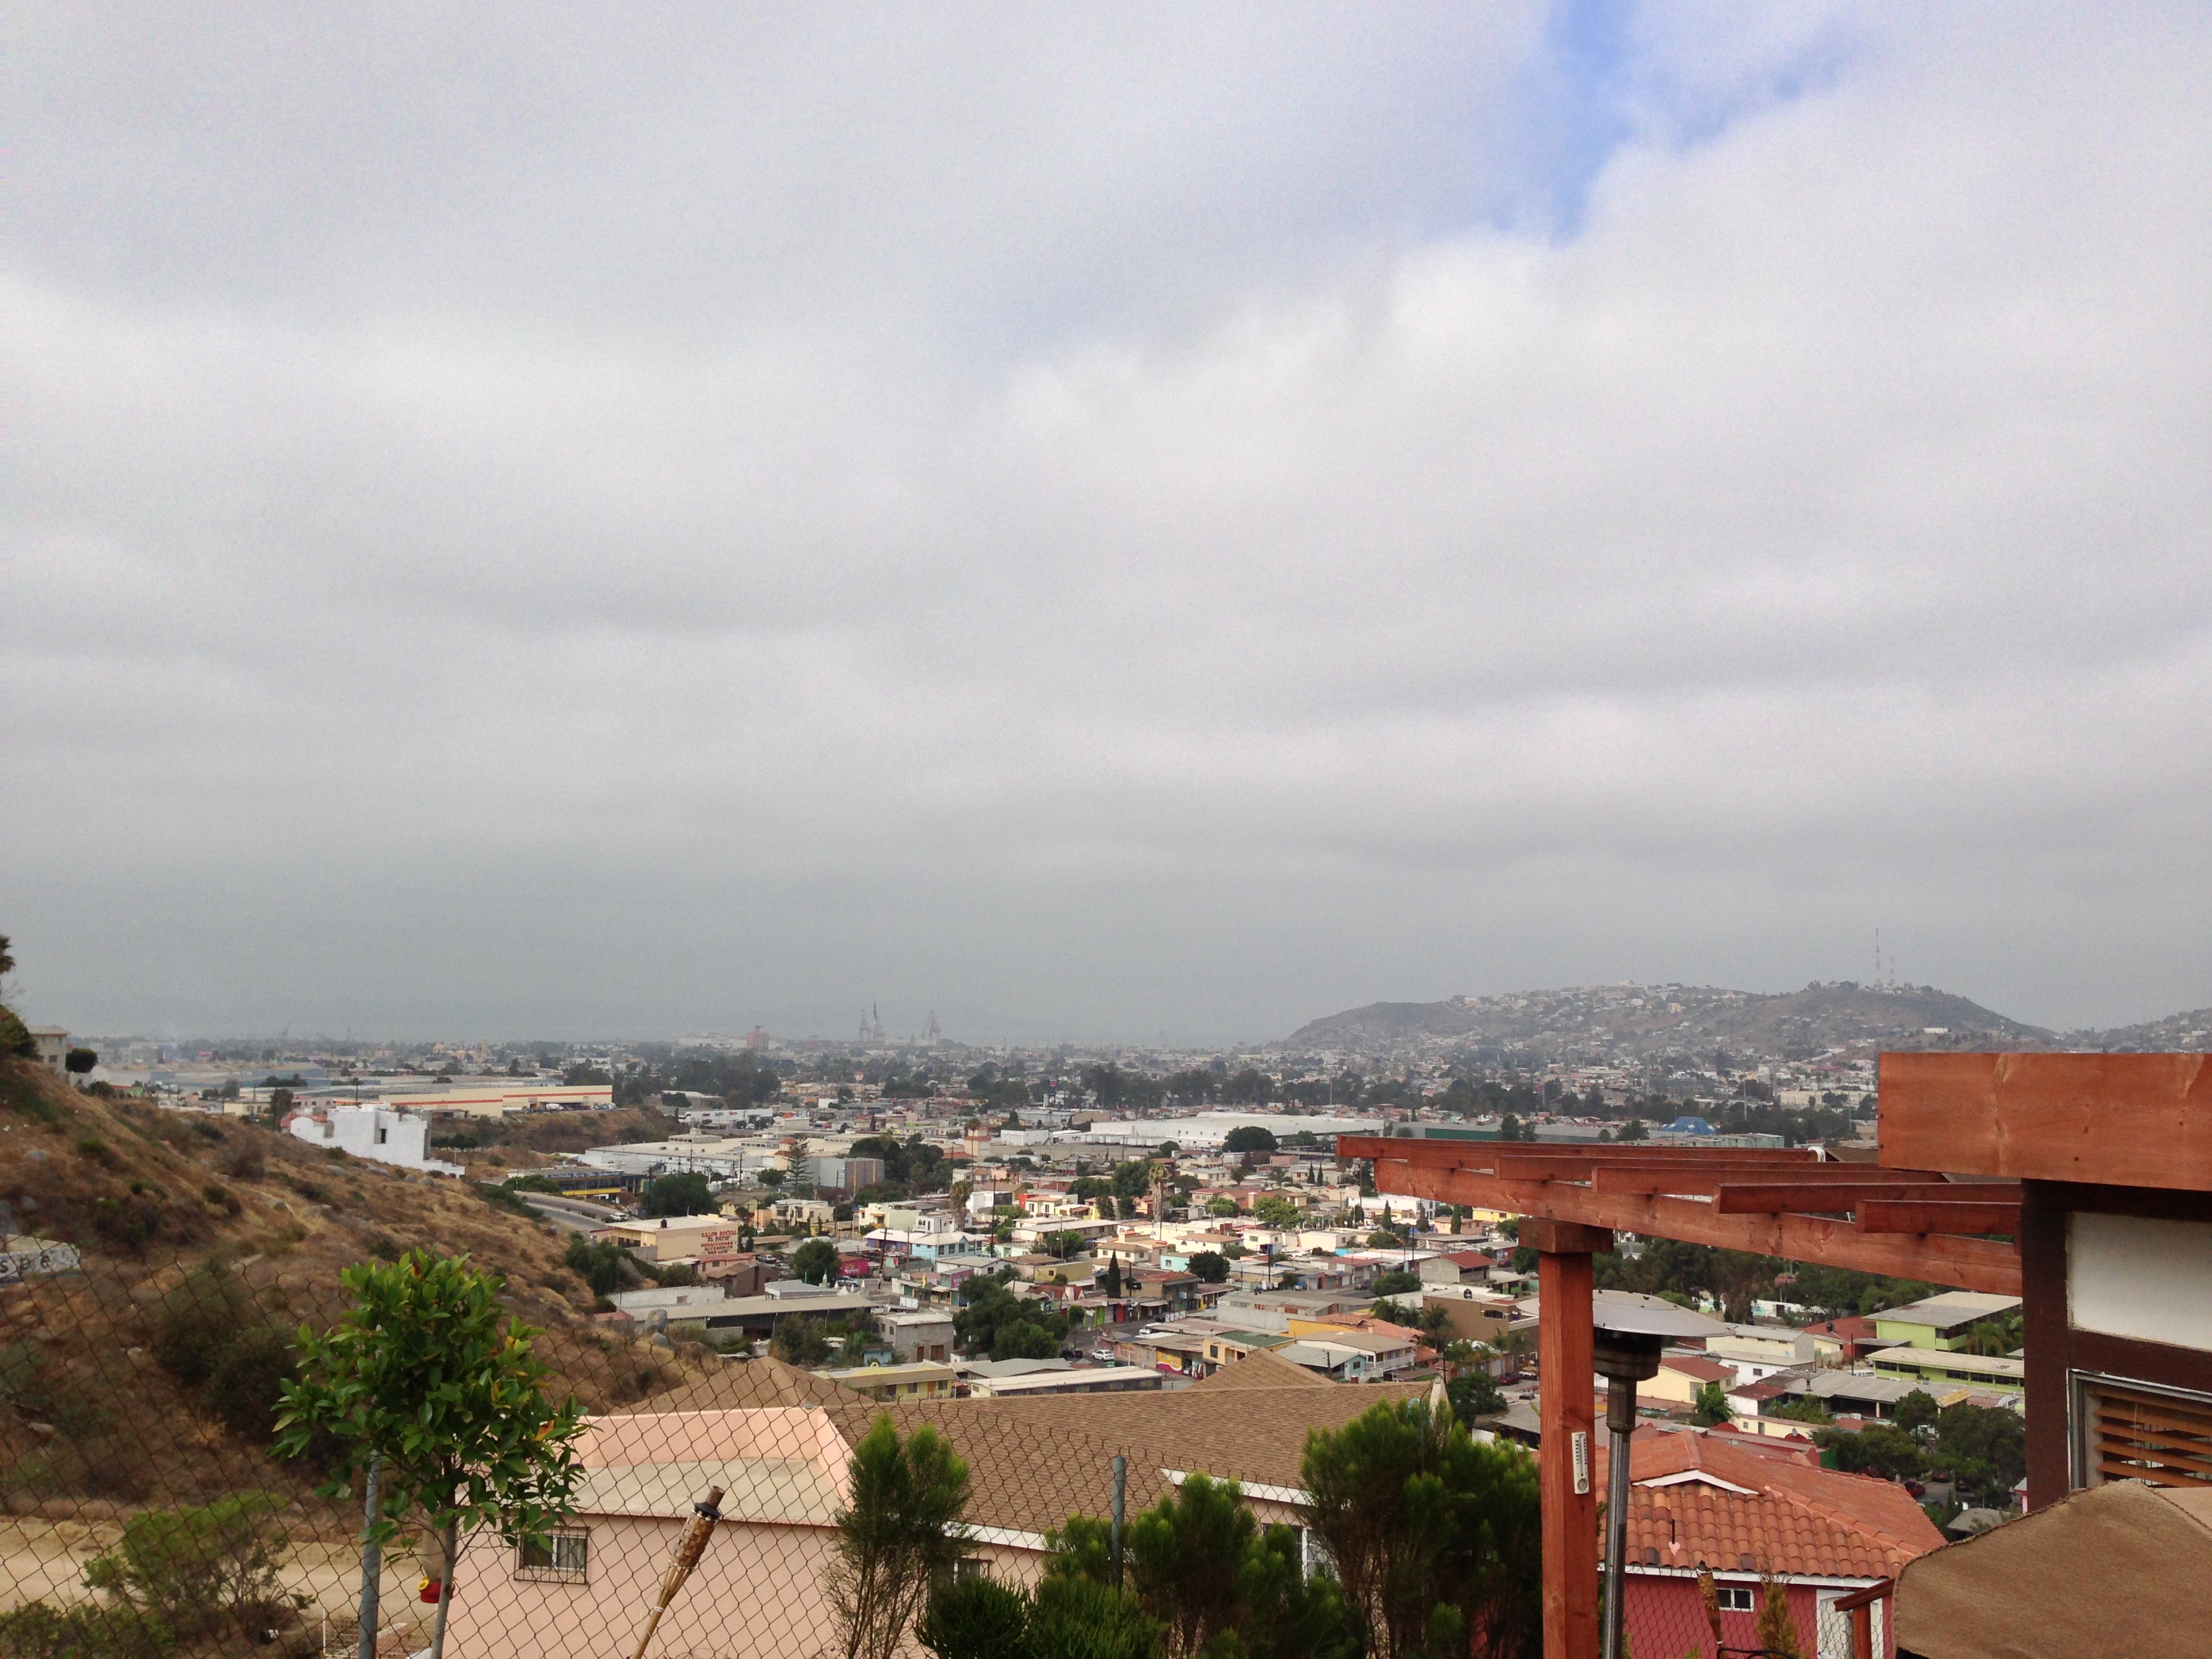 The view of Ensenada from the church site